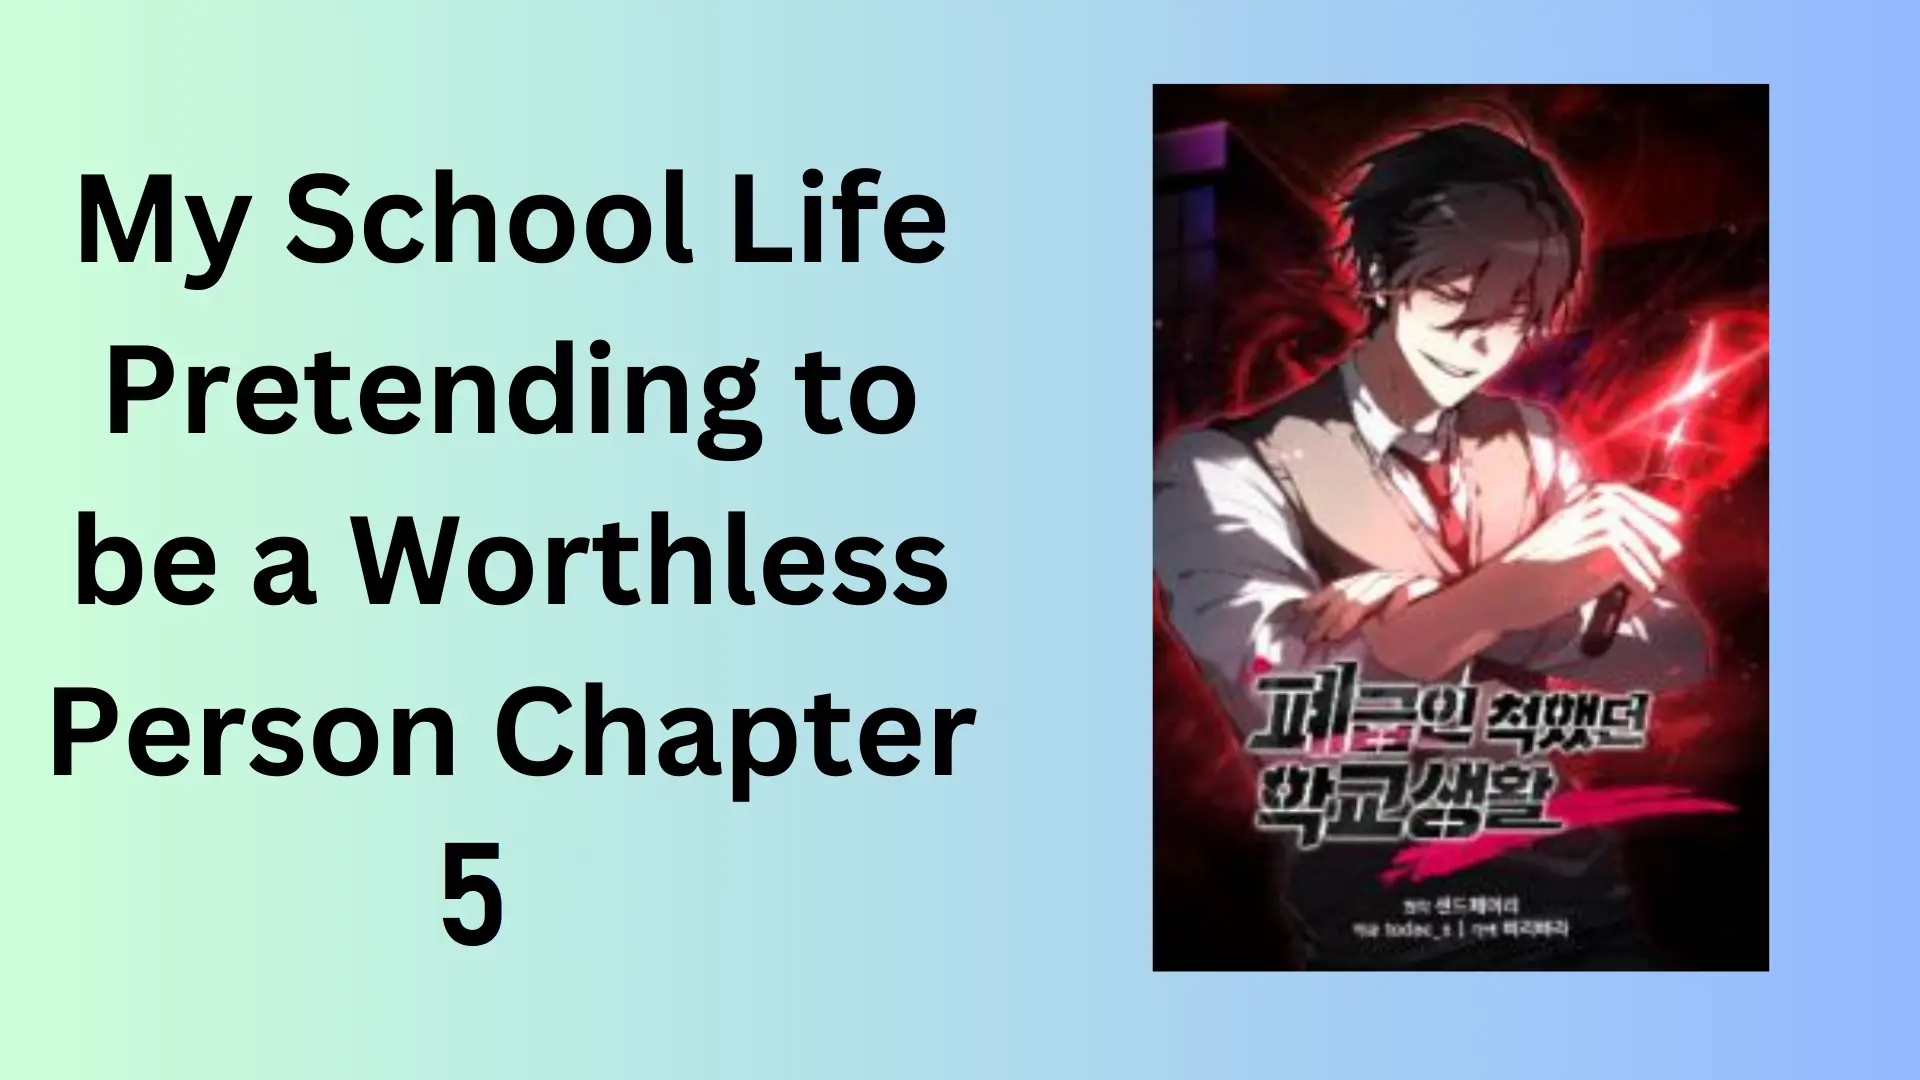 My School Life Pretending to be a Worthless Person Chapter 5